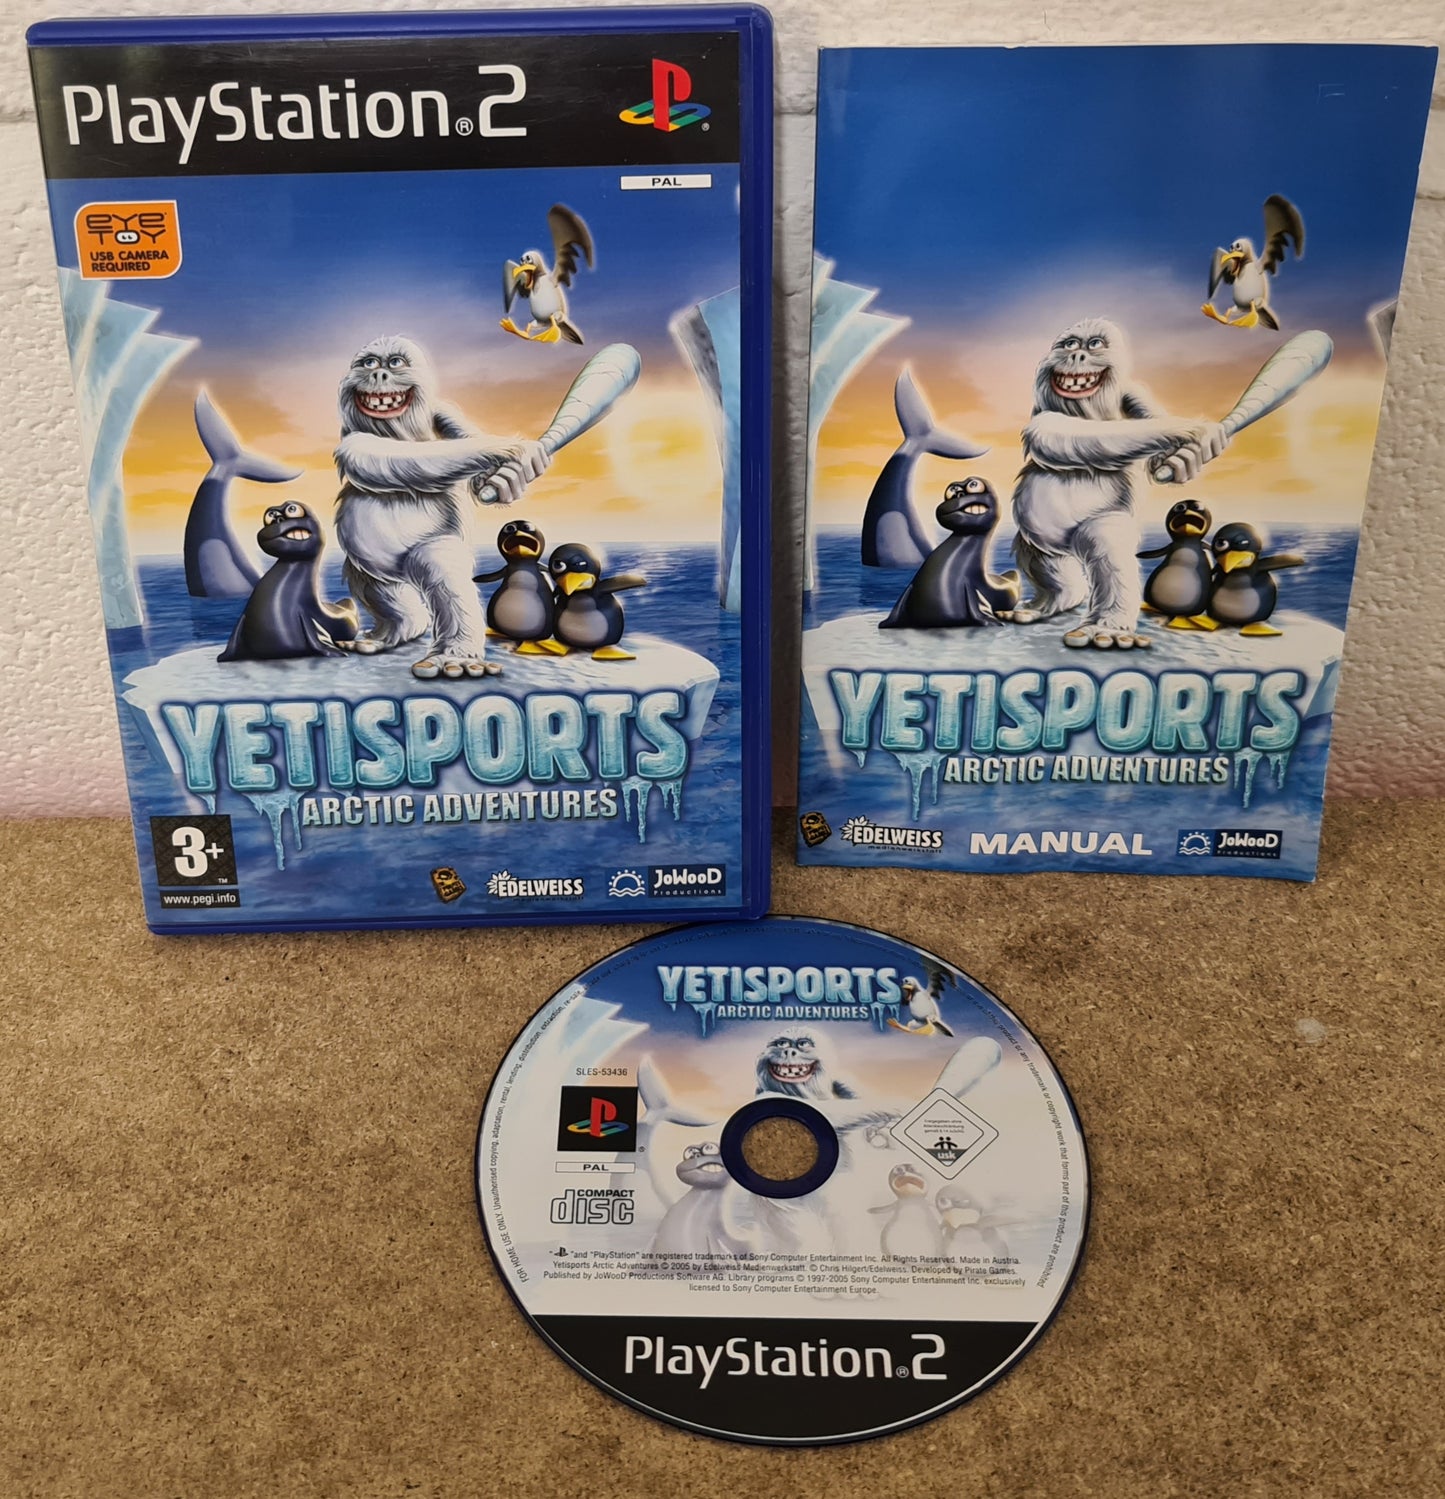 Yetisports Arctic Adventures Sony Playstation 2 (PS2) Game